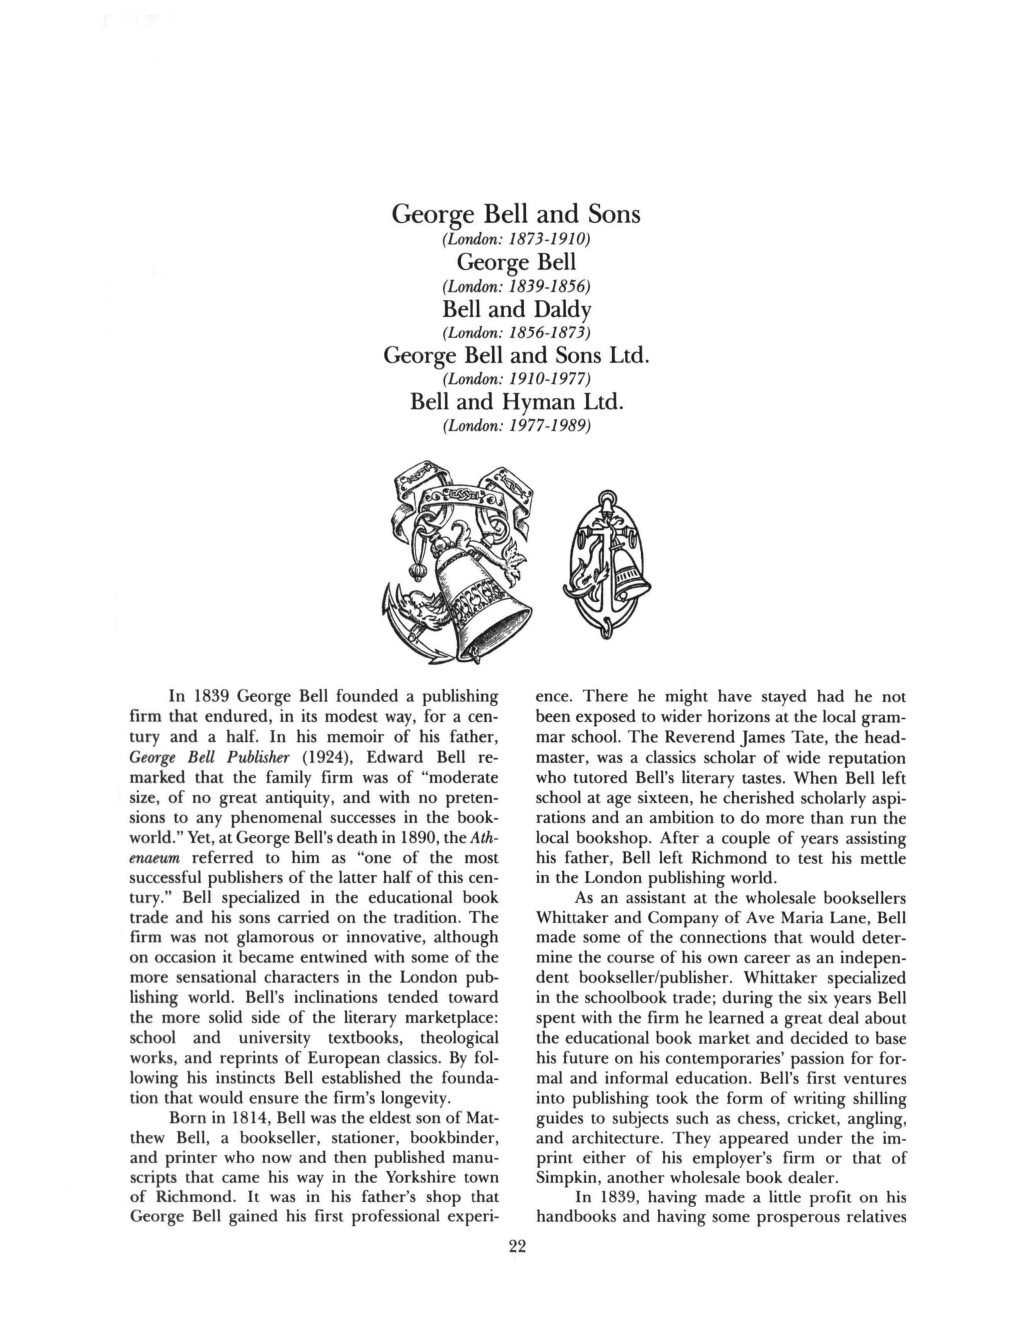 George Bell and Sons (London: 1873-1910) George Bell (London: 1839-1856) Bell and Daldy (London: 1856-1873) George Bell and Sons Ltd